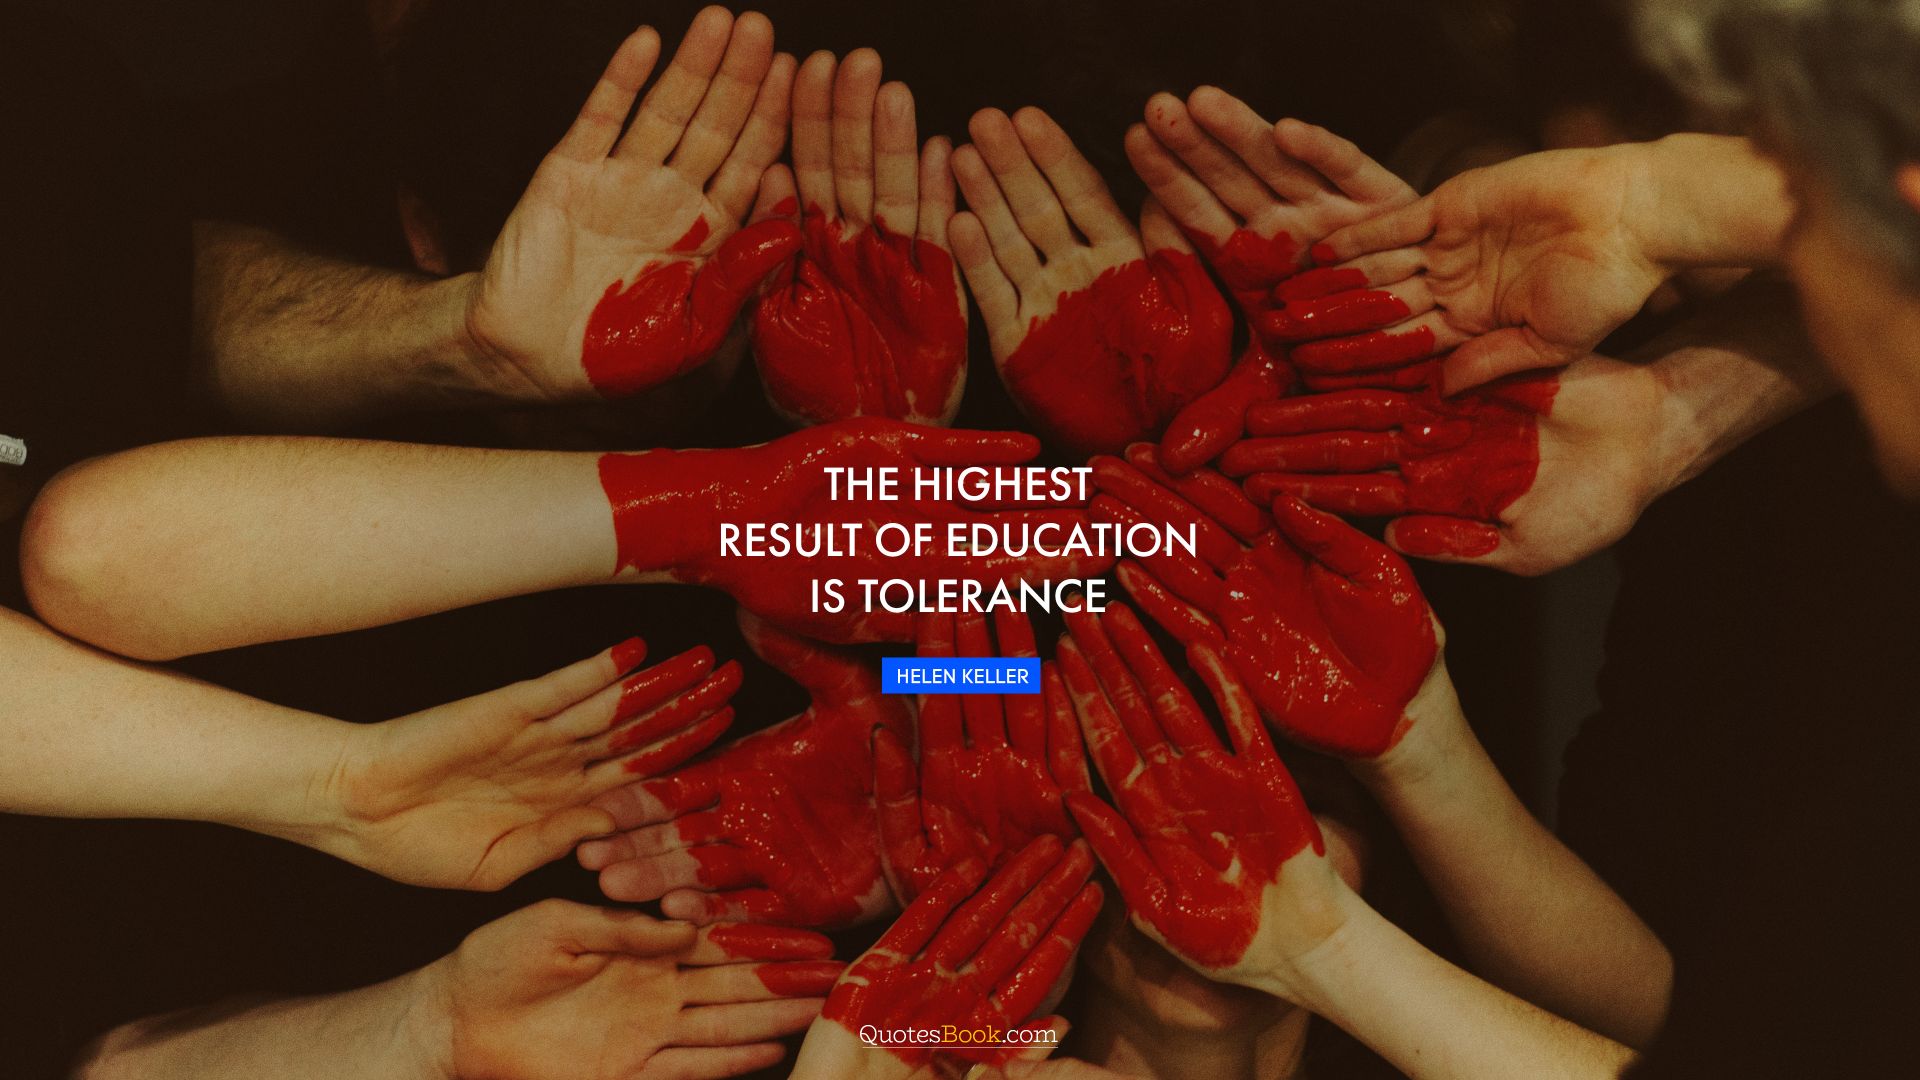 The highest result of education is tolerance. - Quote by Helen Keller